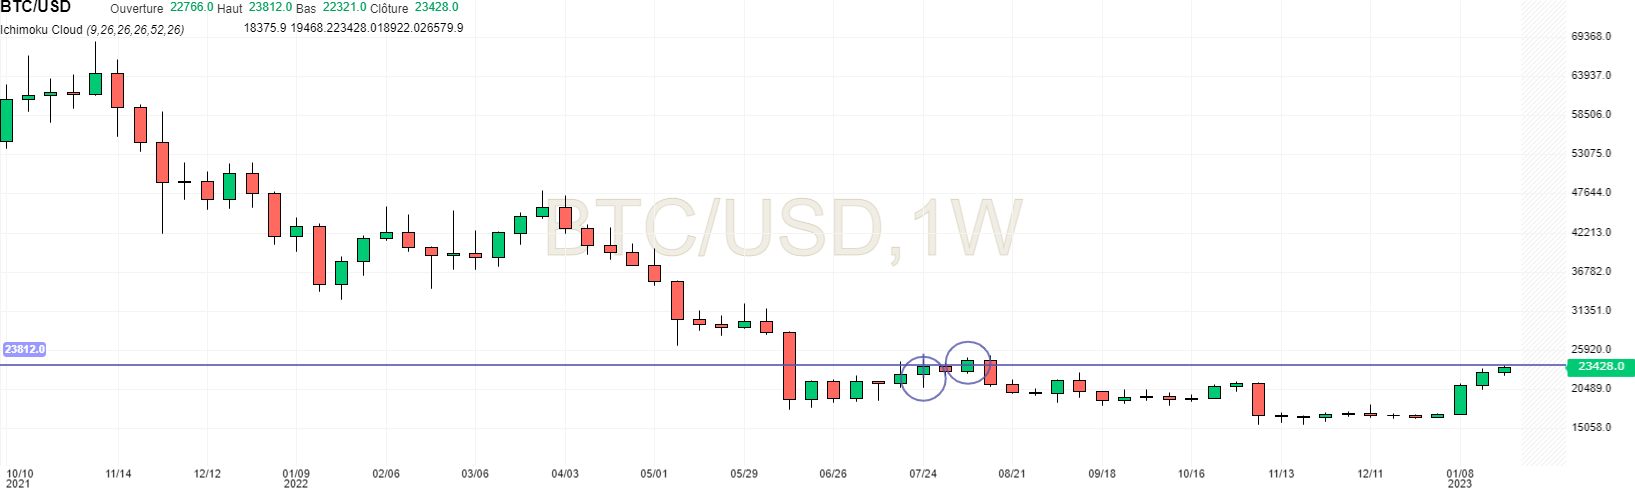 BTC/USD in weekly units